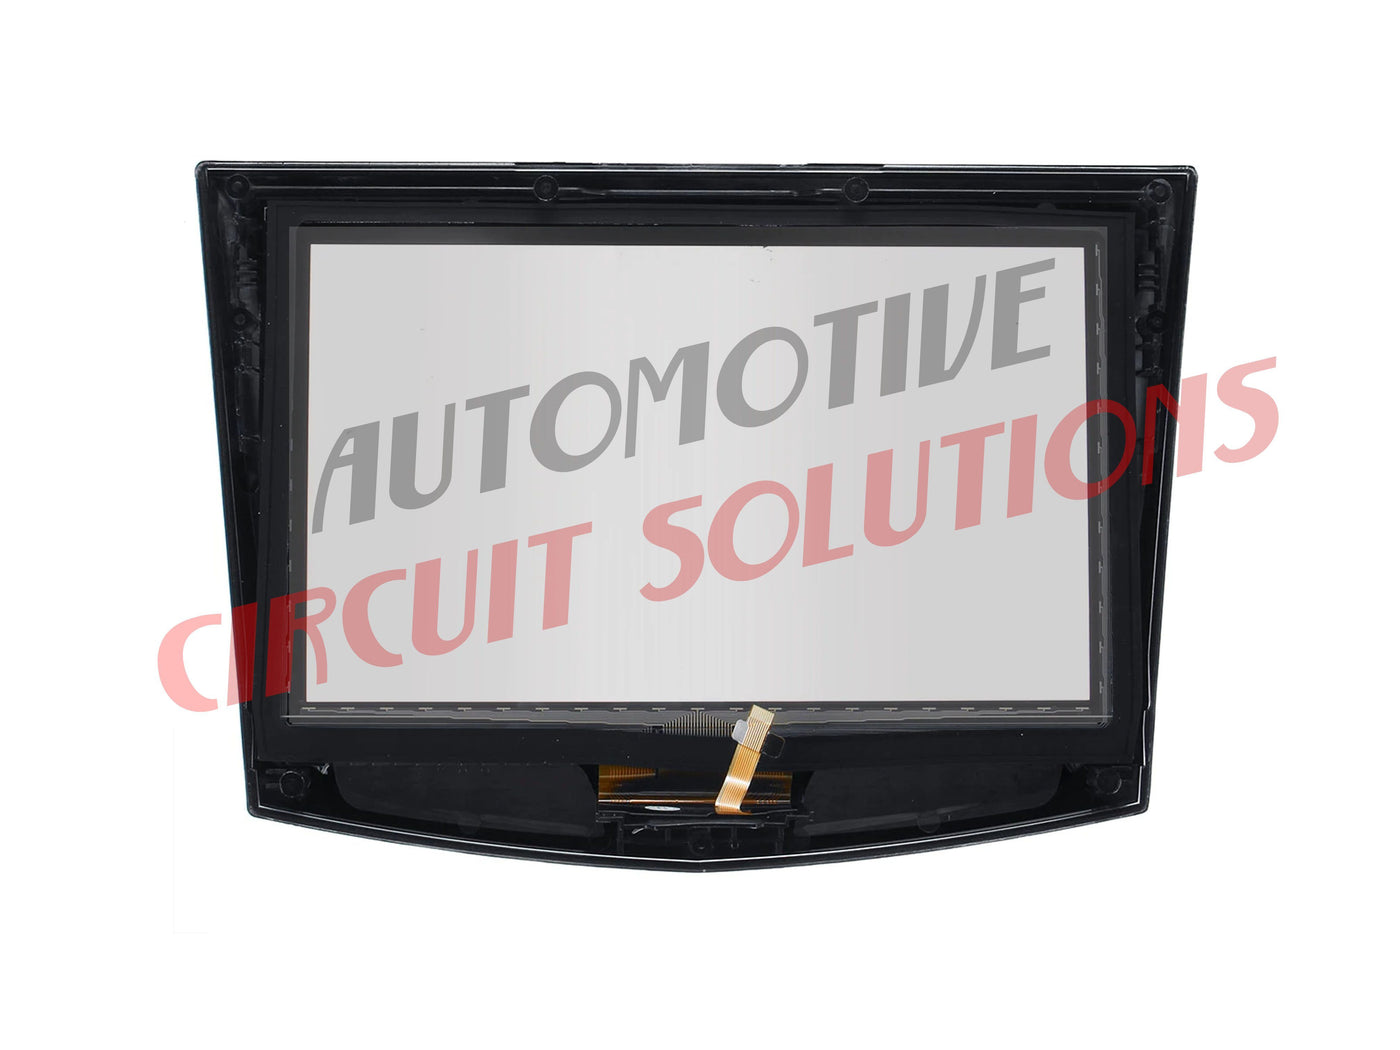 Touch Screen Display For Cadillac Escalade ATS CTS SRX XTS CUE 2013-2017 sense for touch display digitizer 23106488 Automotive Circuit Solutions 